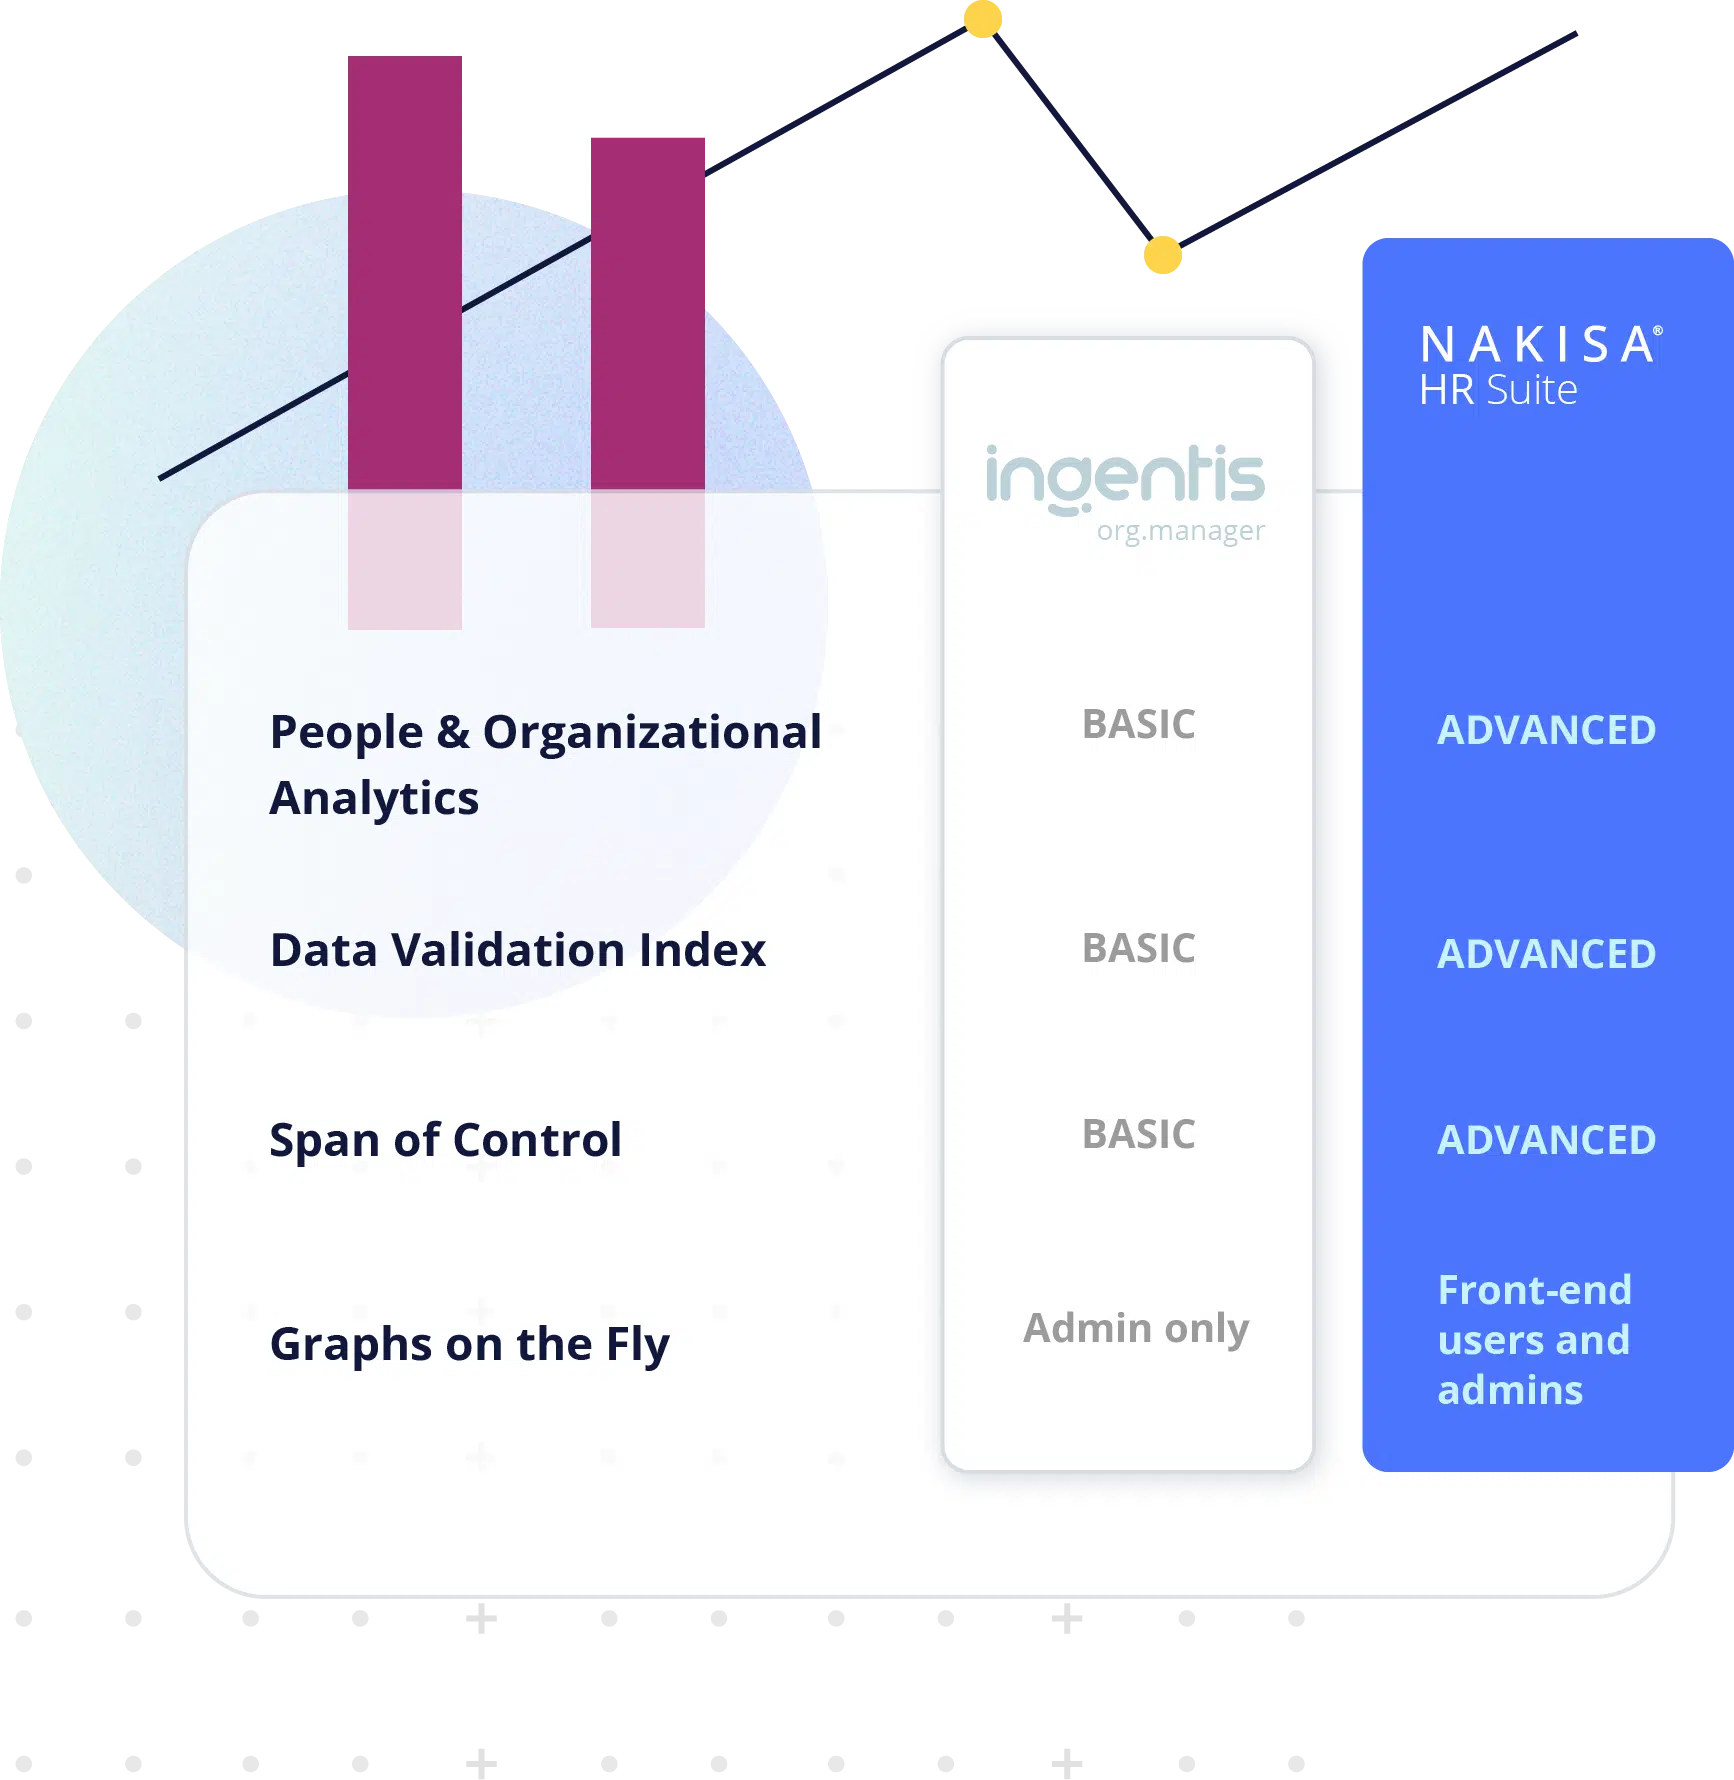 Reports and Analytics Comparison of Ingentis org.manager and Nakisa HR Suite